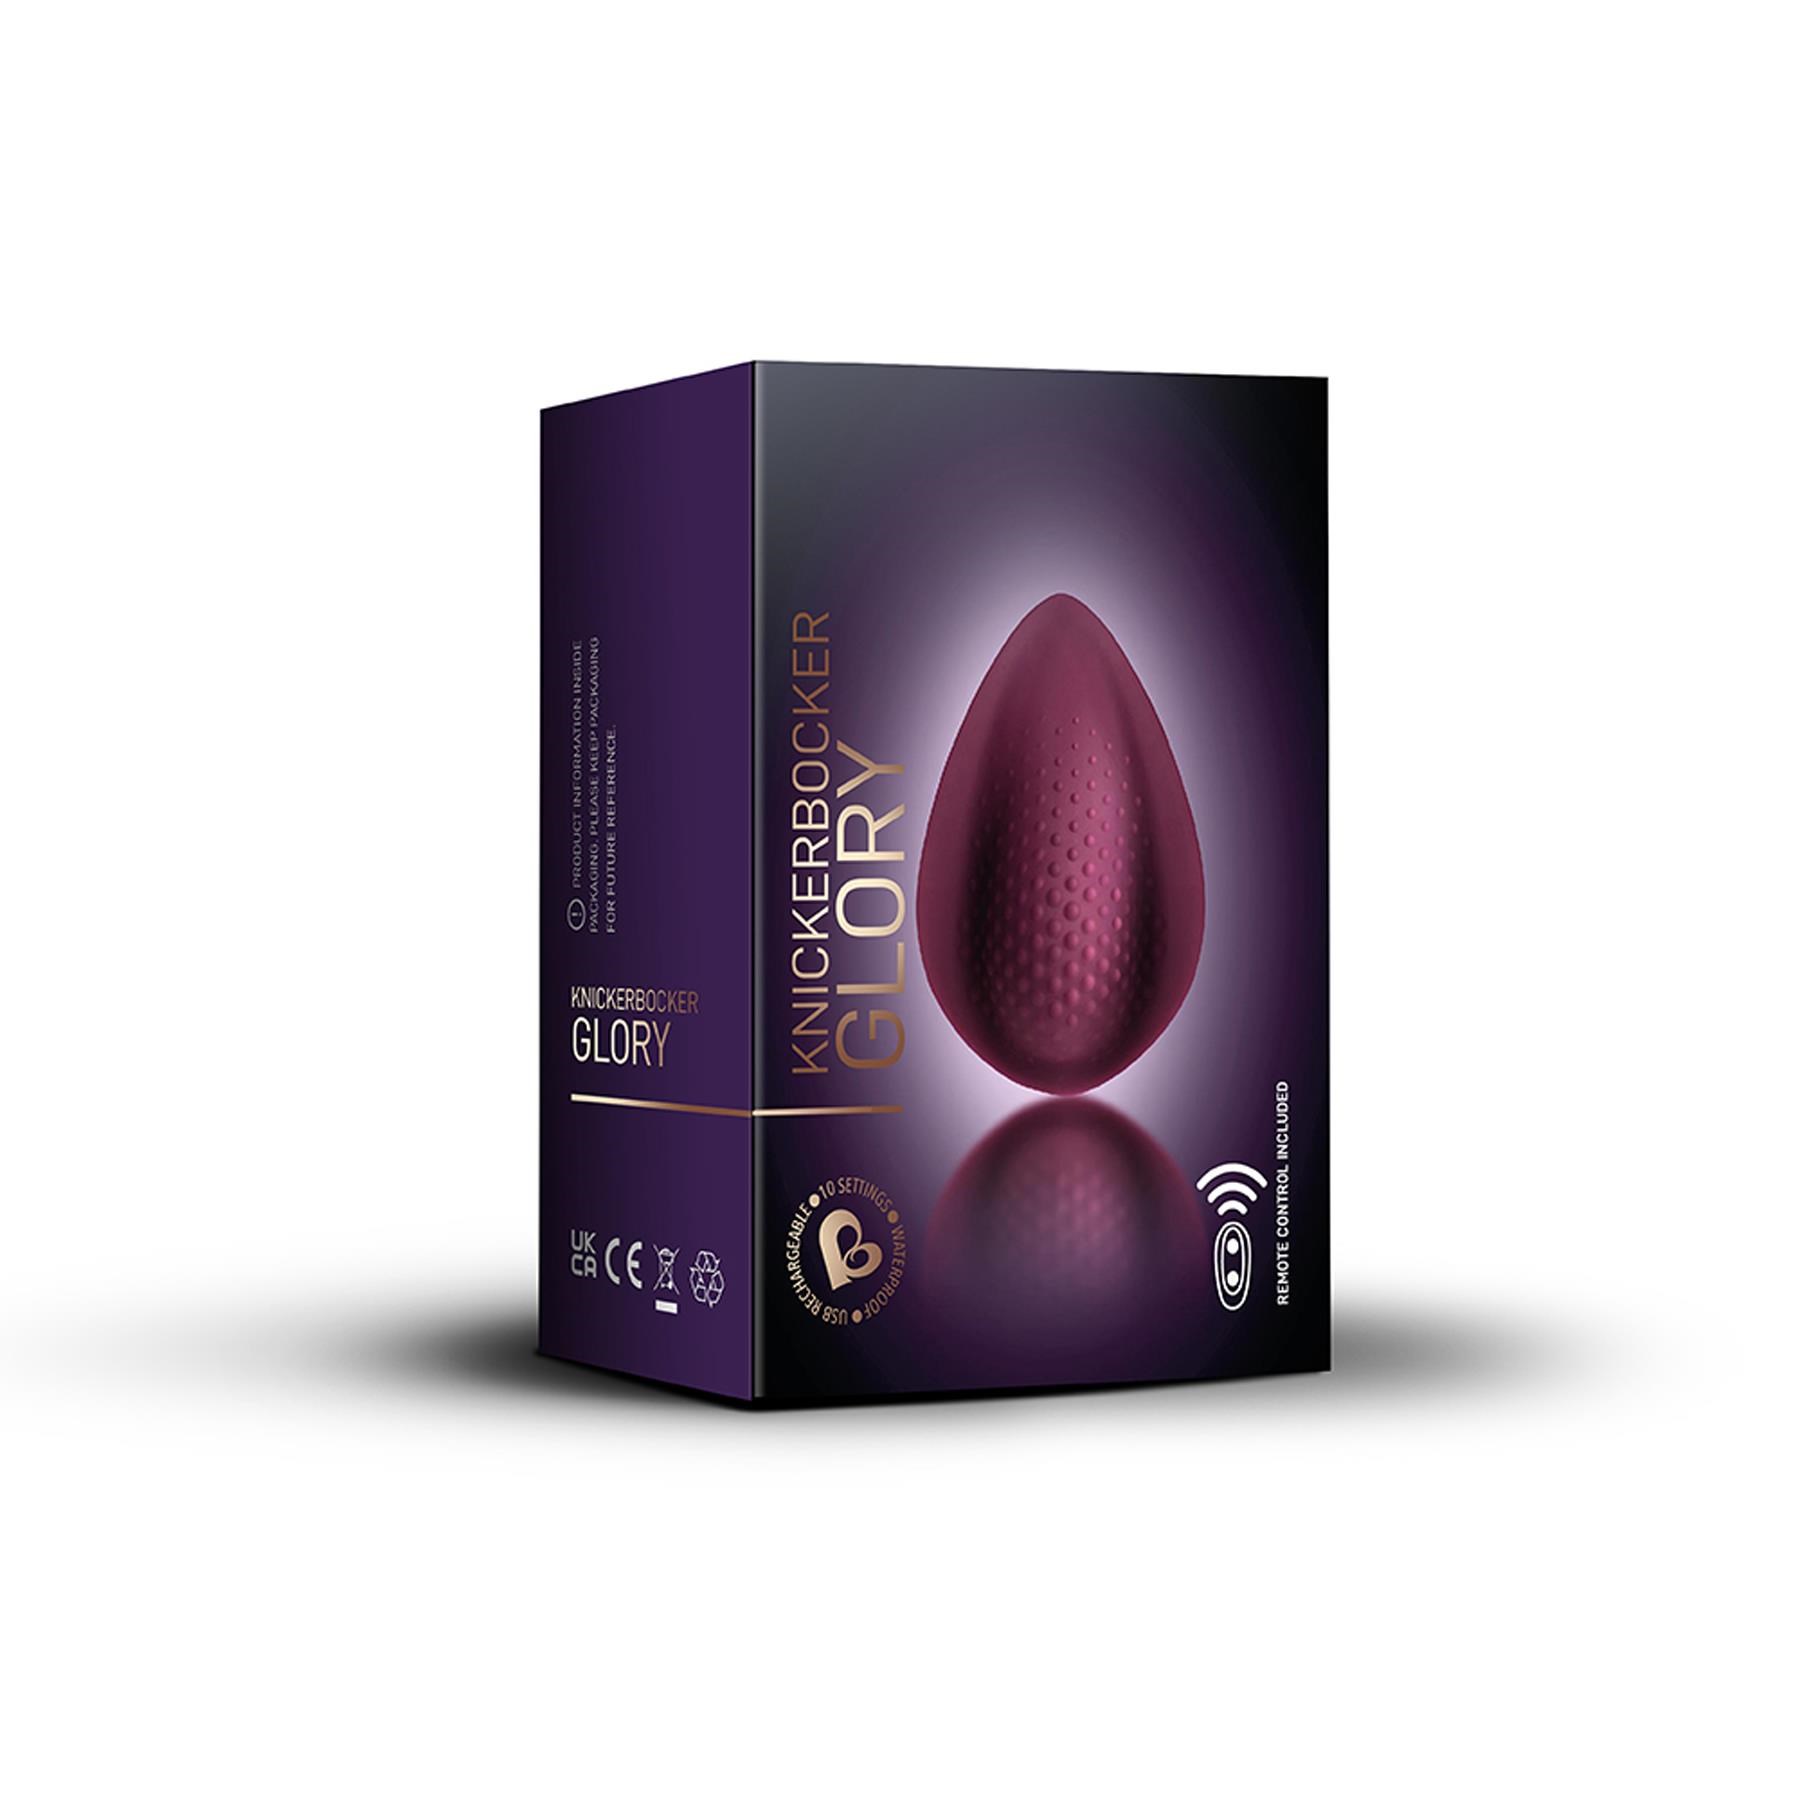 Rocks-Off Knickerbocker Glory Panty Vibrator With Remote Control - Packaging Shot